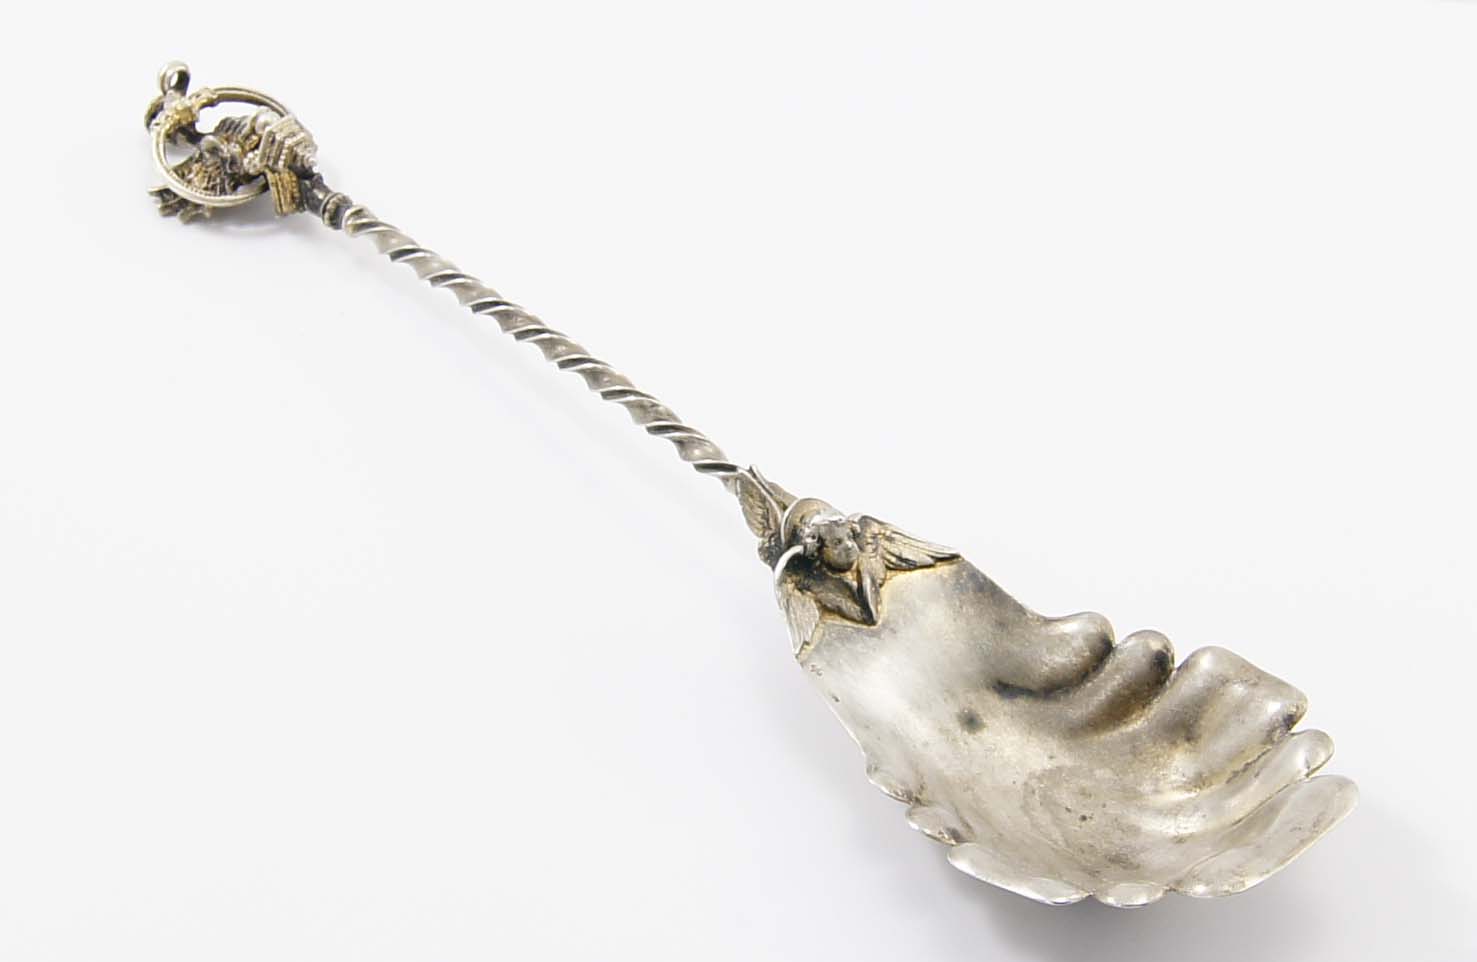 Early collectors 800 silver decorative spoon with shell bowl on twist stem with cherub and